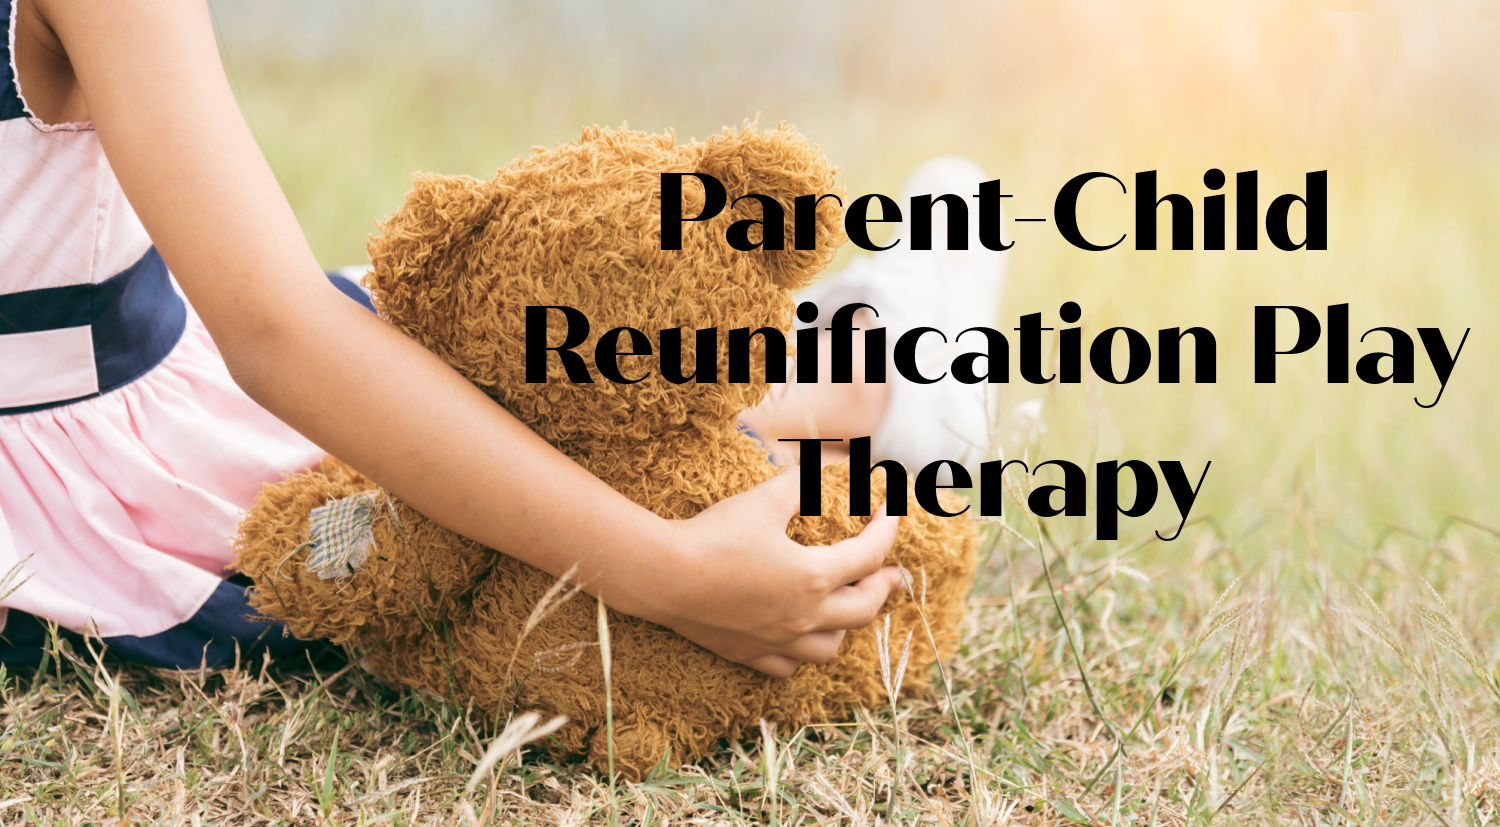 reunification therapy